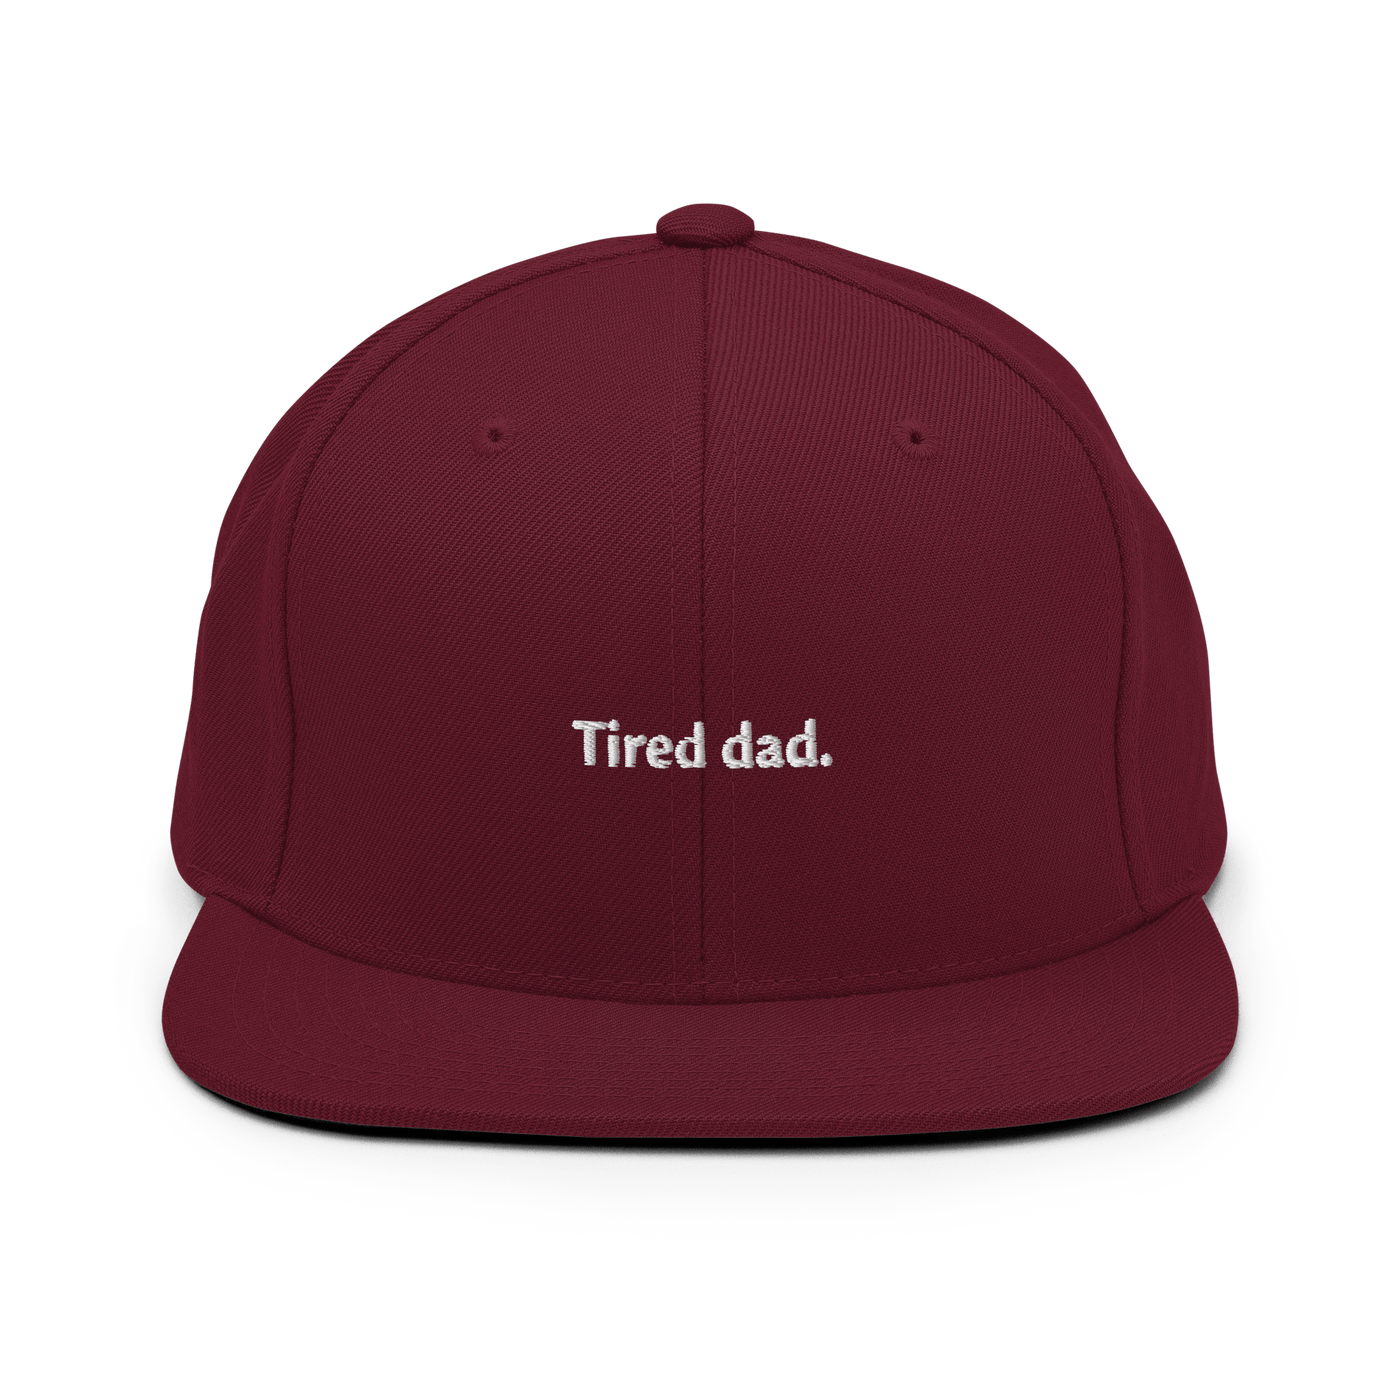 Tired dad Snapback - Maroon - - Just Another Cap Store